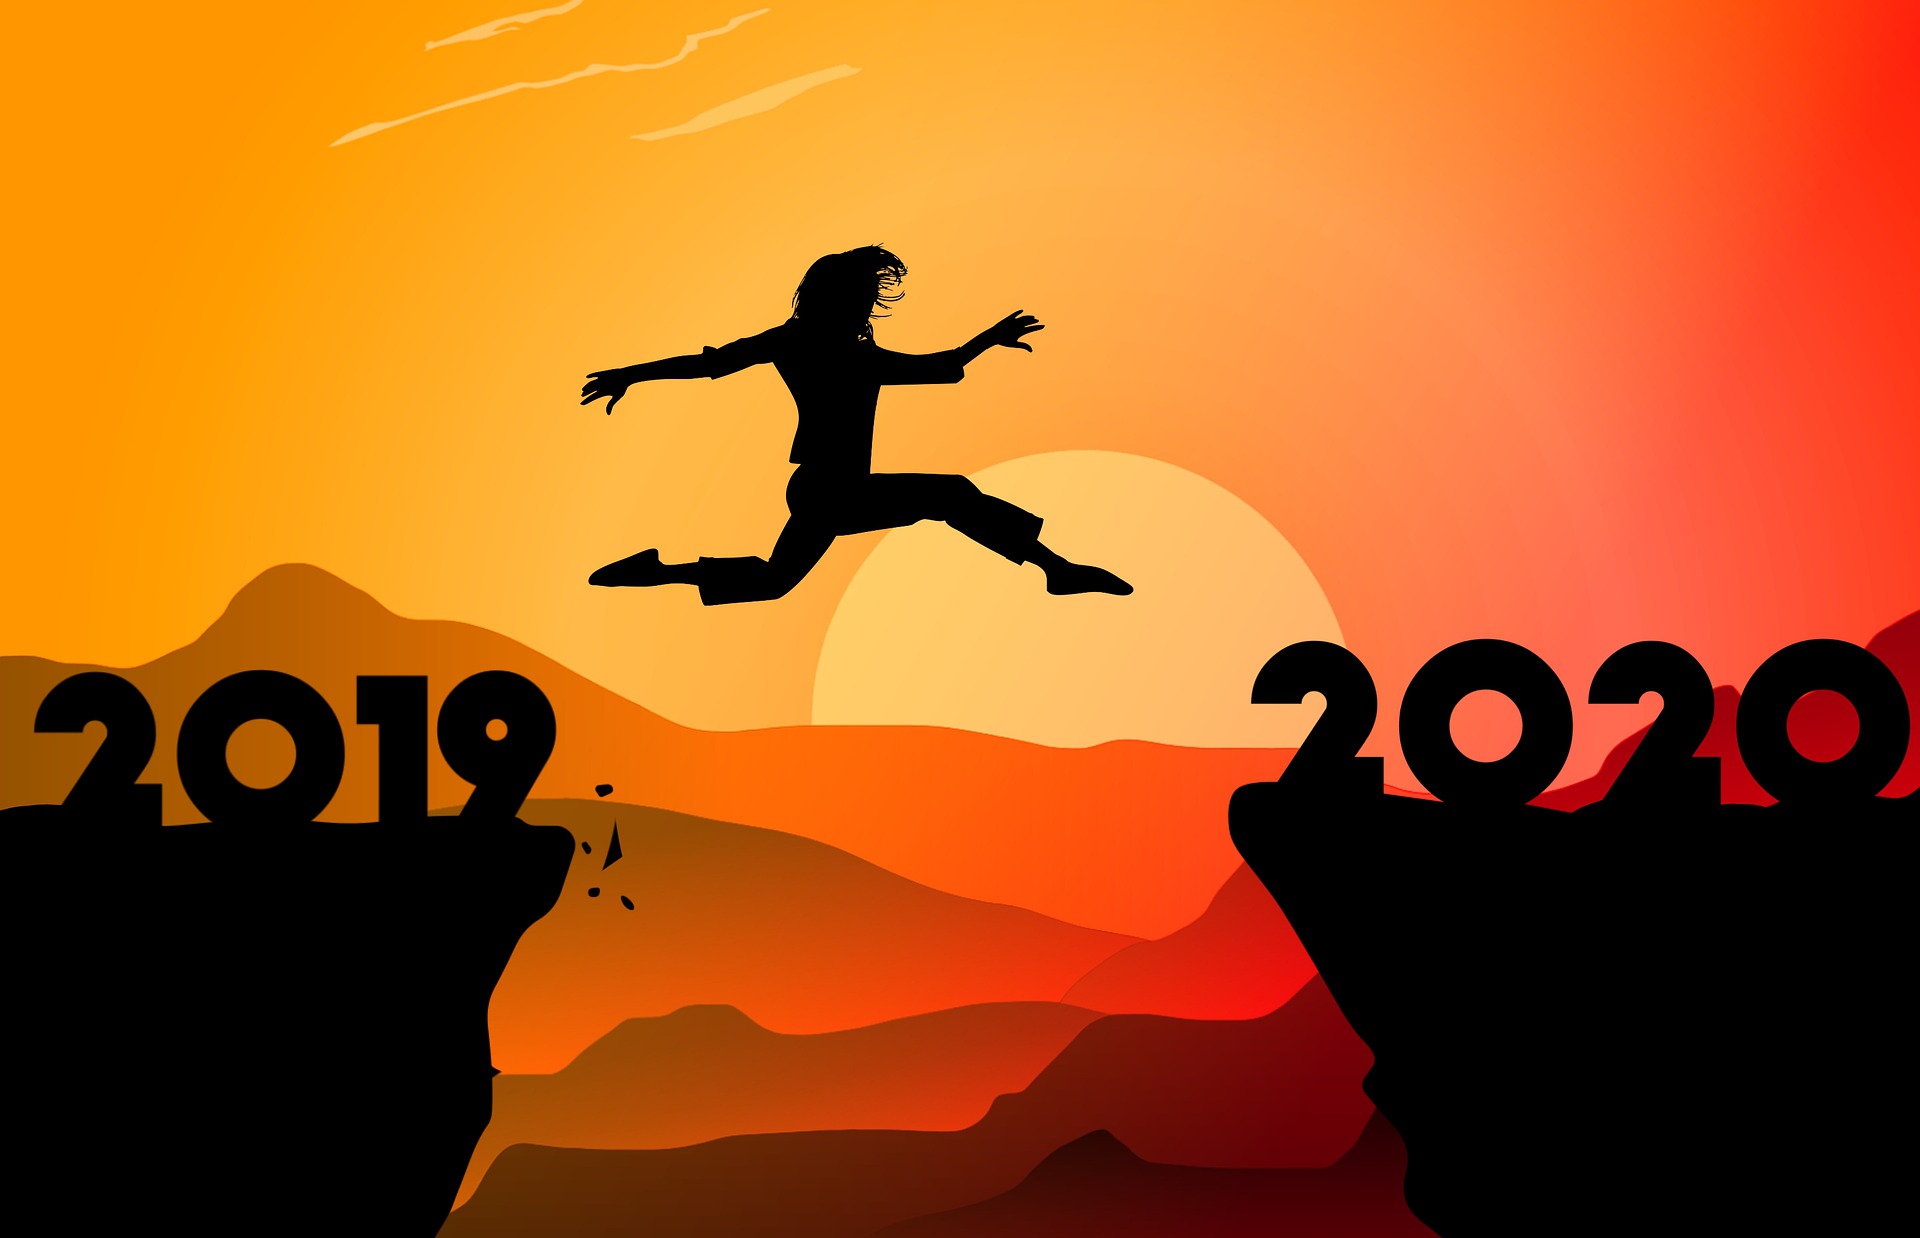 Against a backdrop of an orange setting sun and orange-hued mountains, a silhouette of a person jumping from a cliff with "2019" on it to a cliff with "2020" on it.